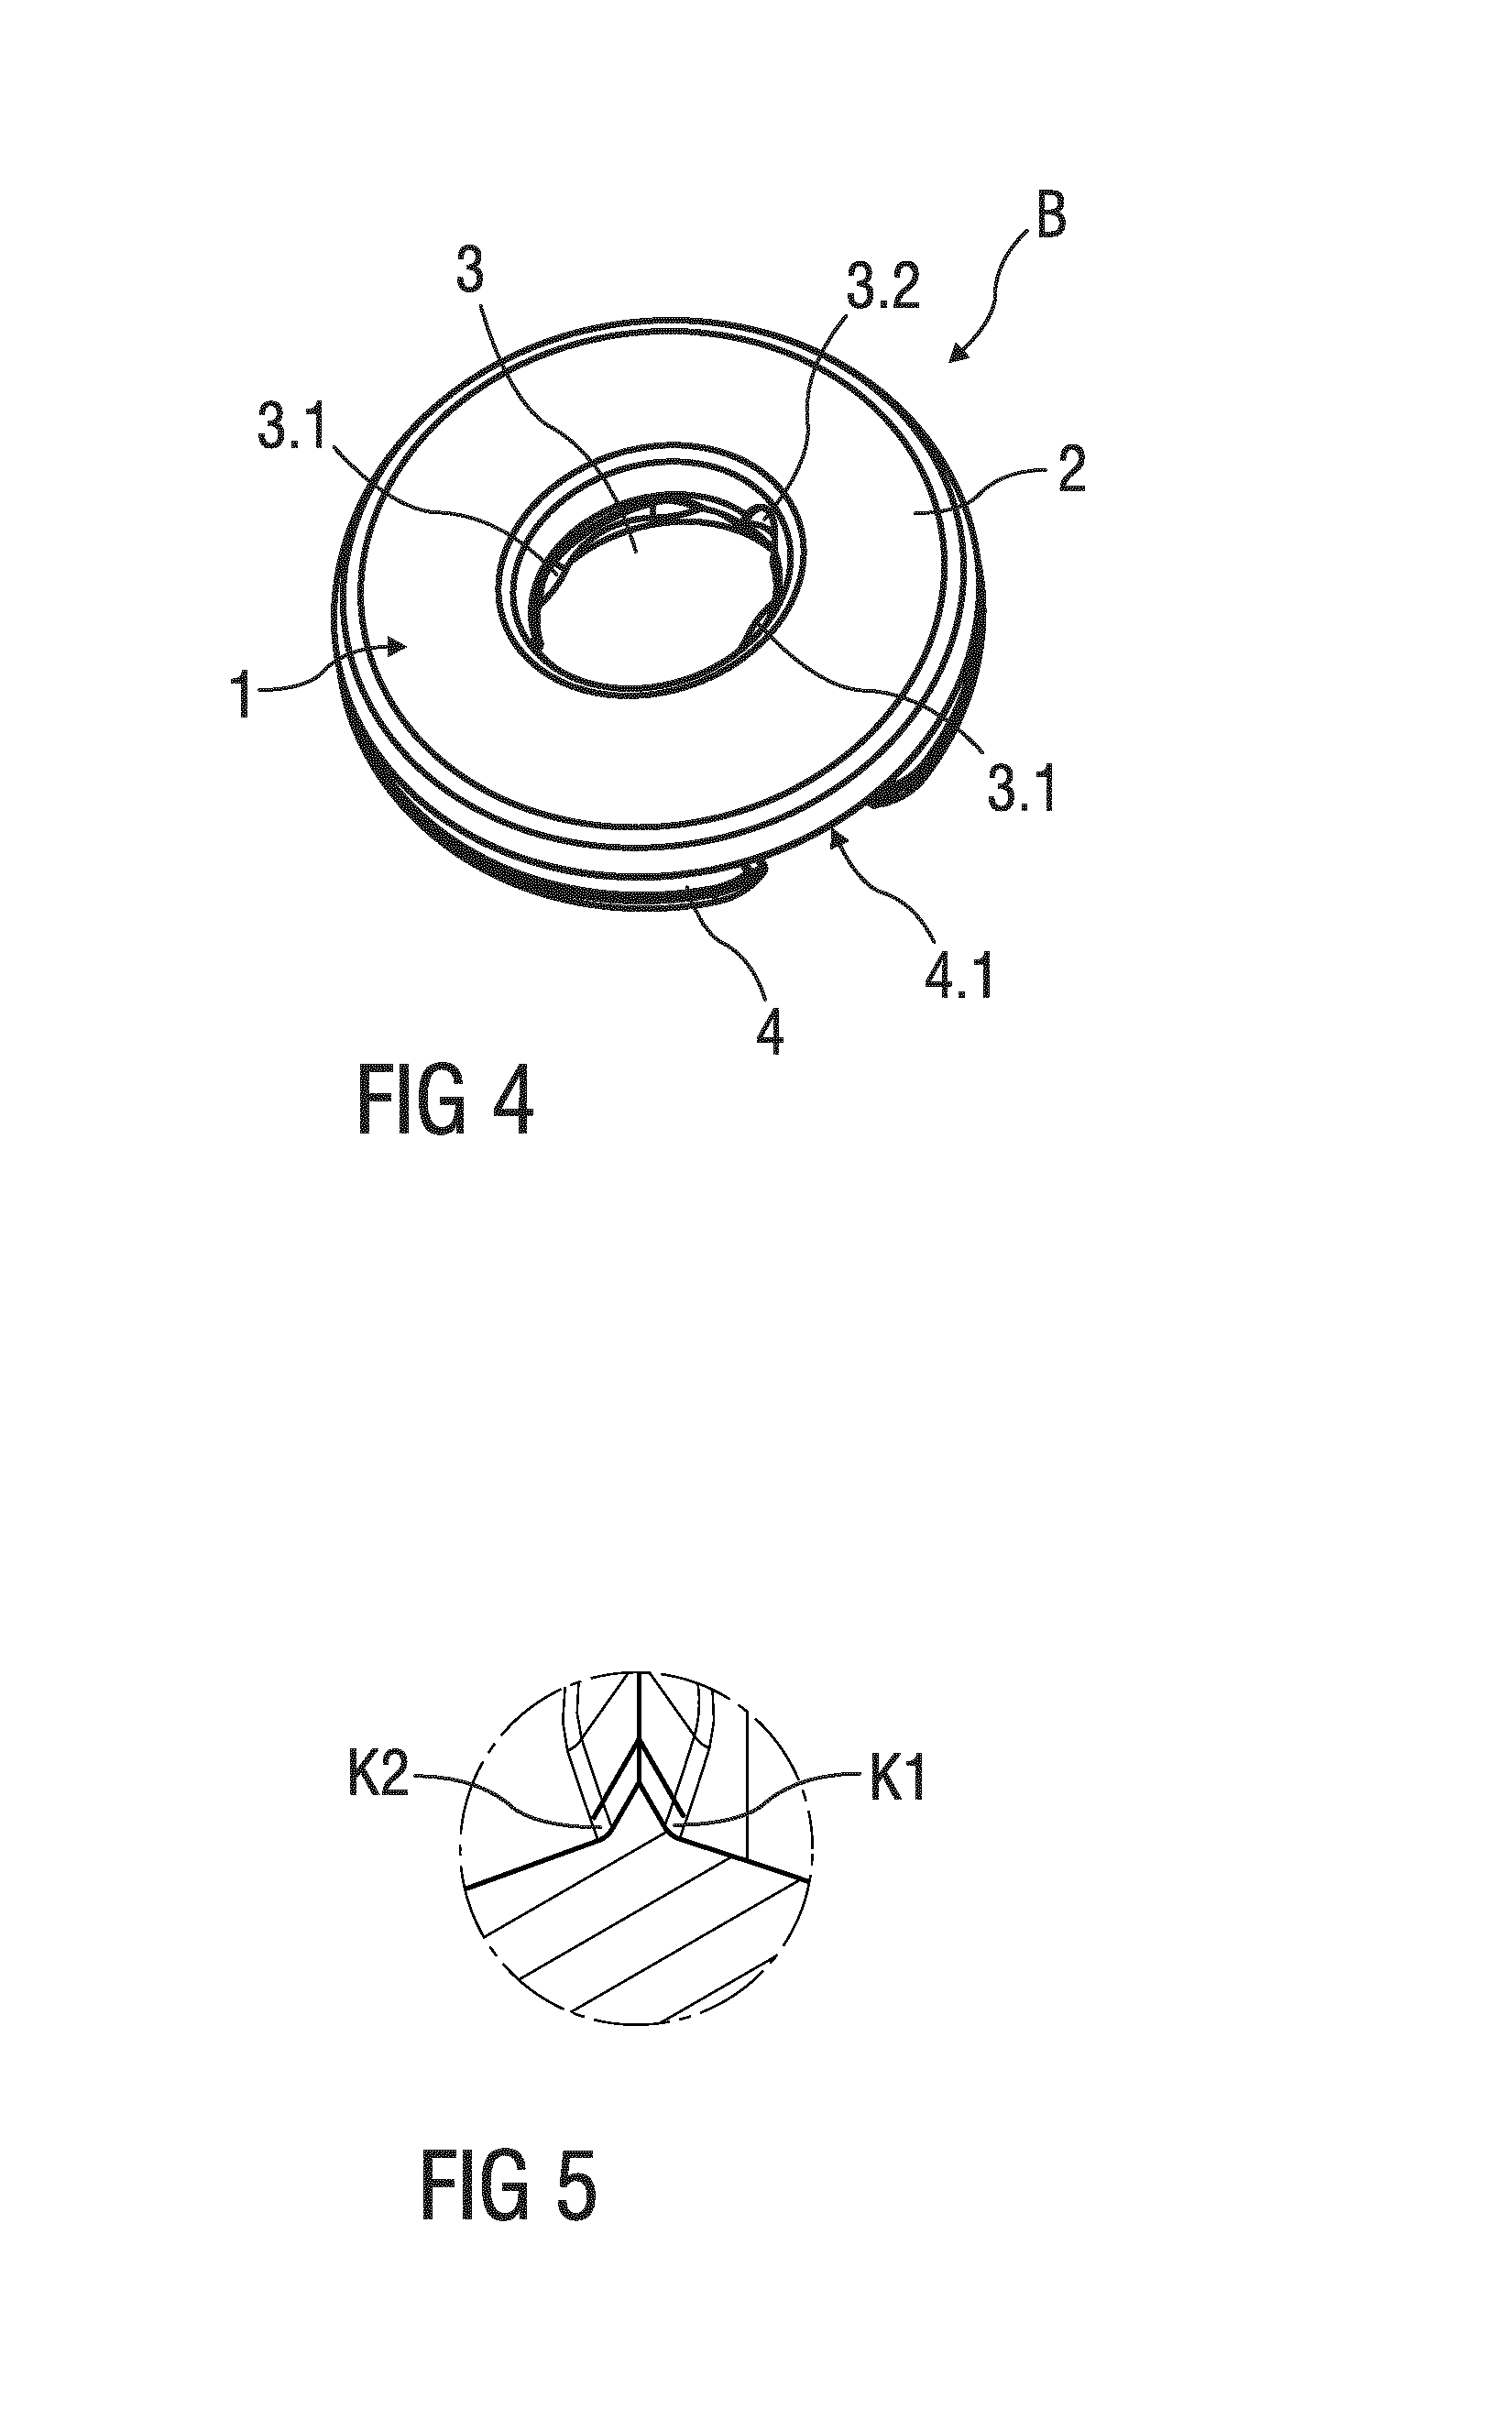 Cover feed-through for a head-restraint rod of a head restraint